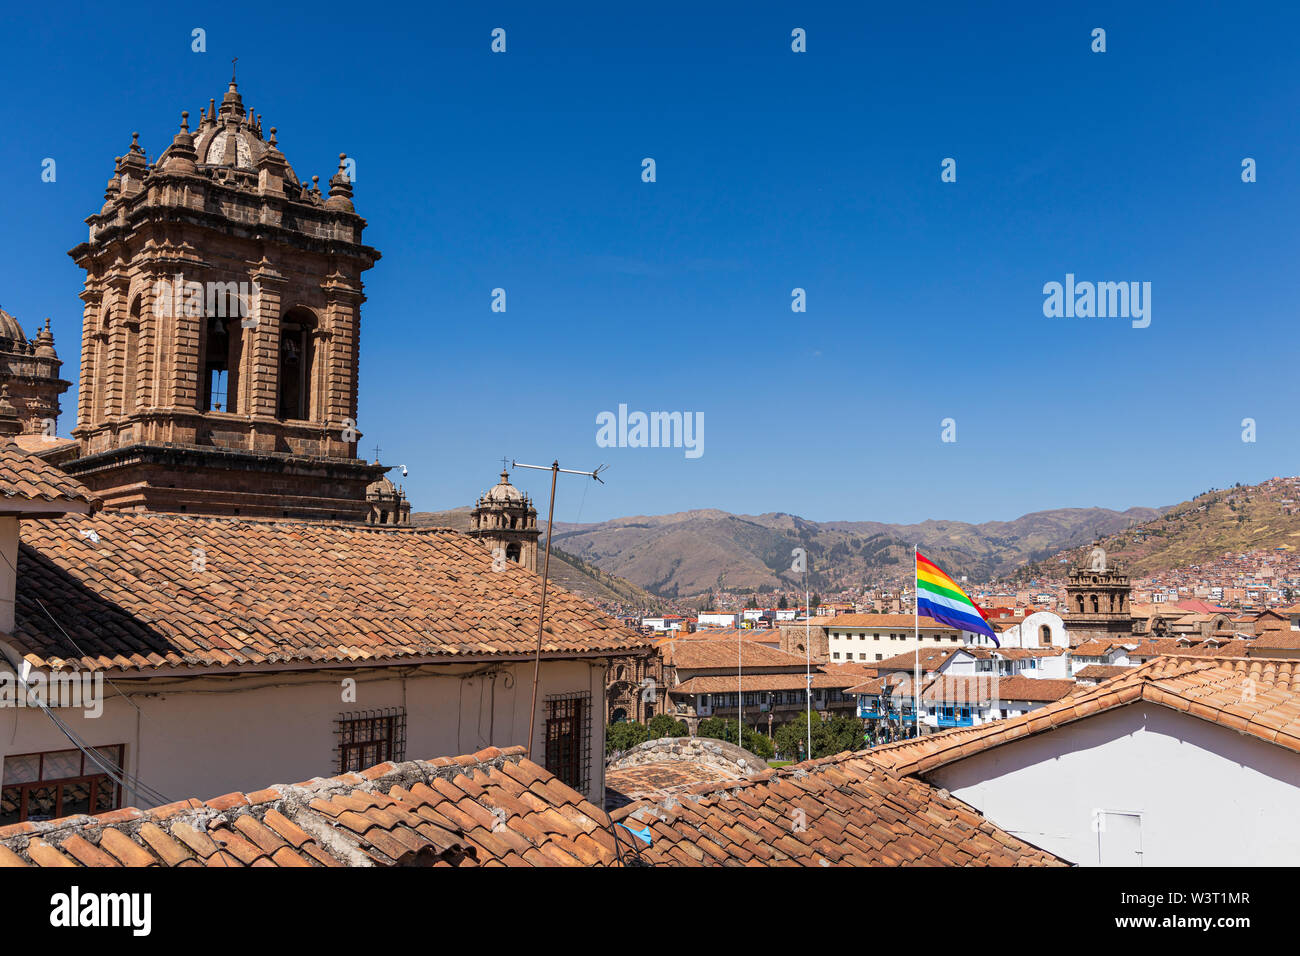 Cusco flag flying over the rooftops in the Plaza de Armas, Cusco, Peru, South America Stock Photo